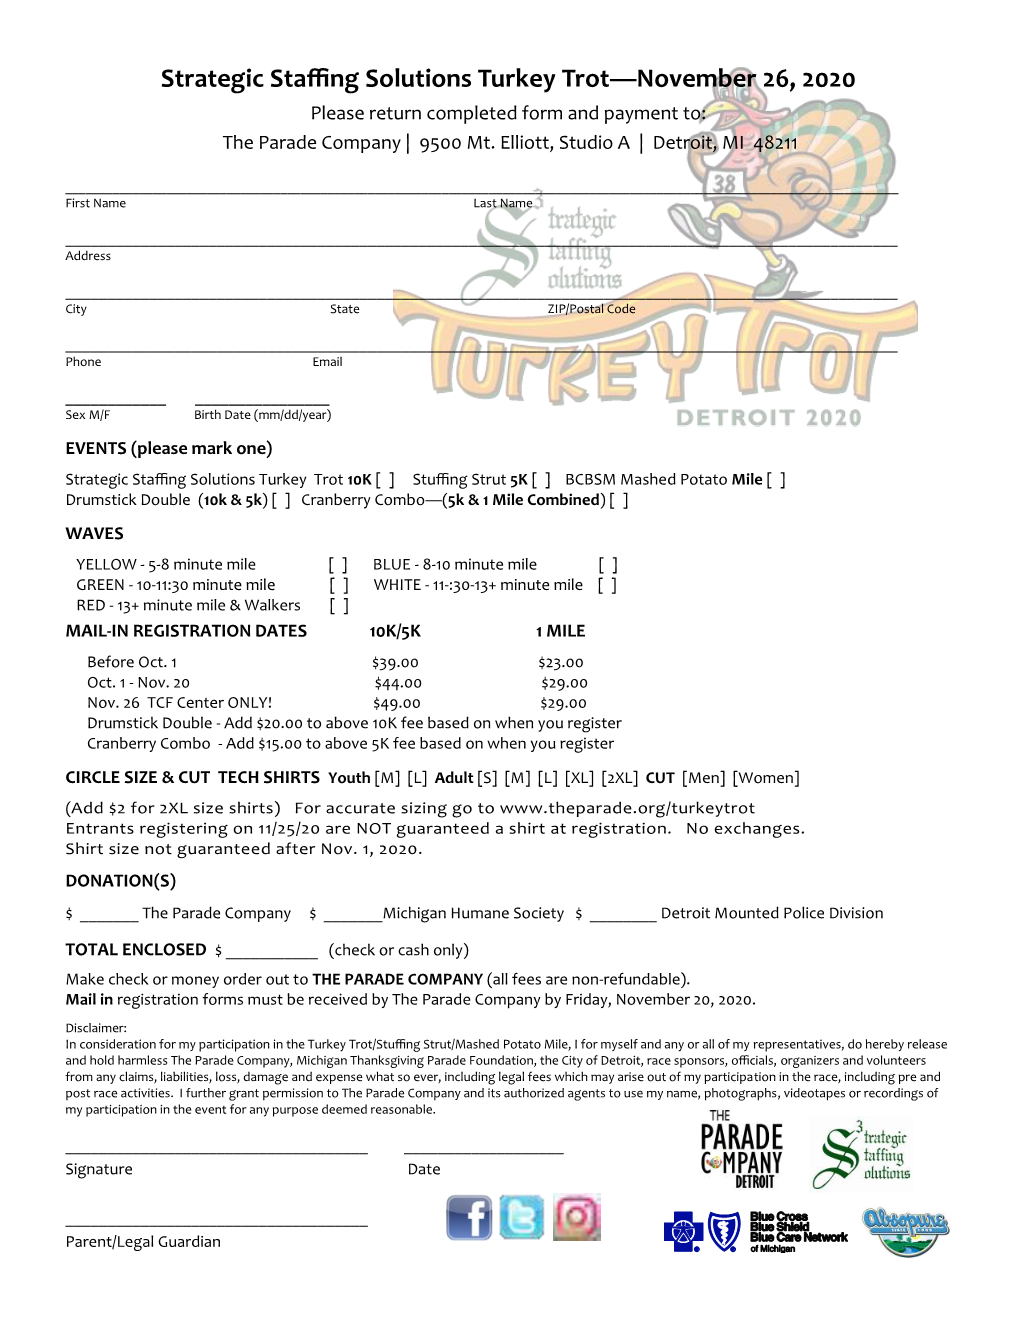 Strategic Staffing Solutions Turkey Trot—November 26, 2020 Please Return Completed Form and Payment To: the Parade Company | 9500 Mt